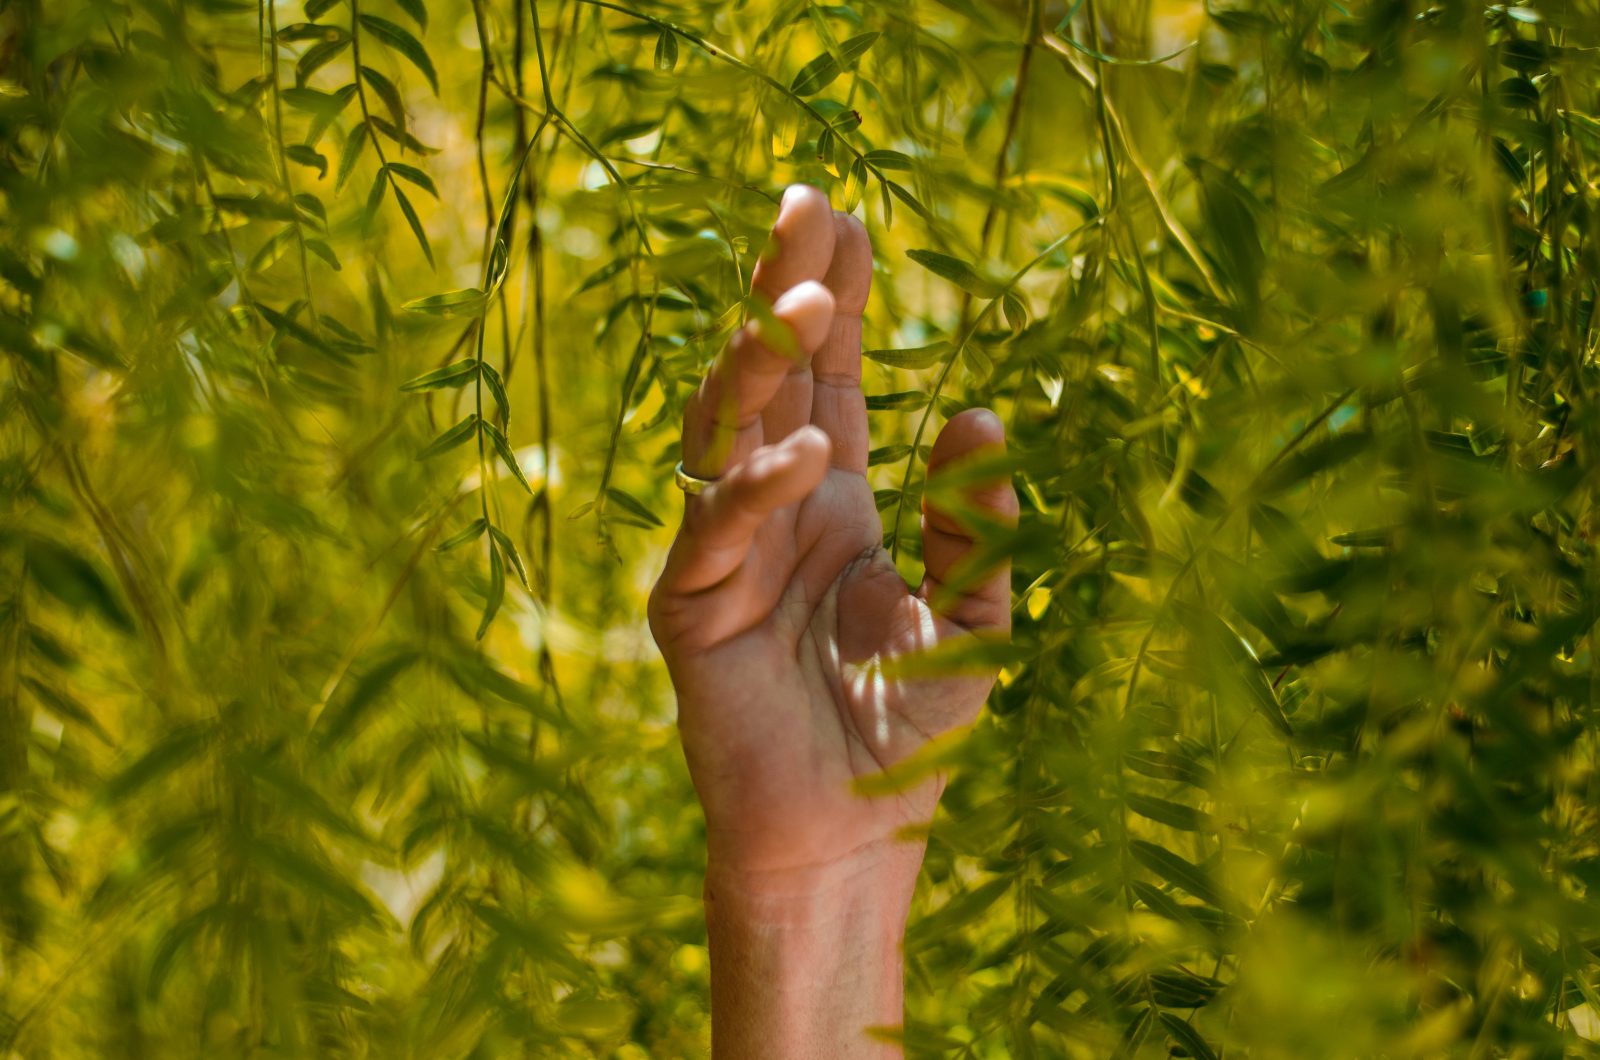 Hand running through leaves how to develop a sustainable sampling campaign